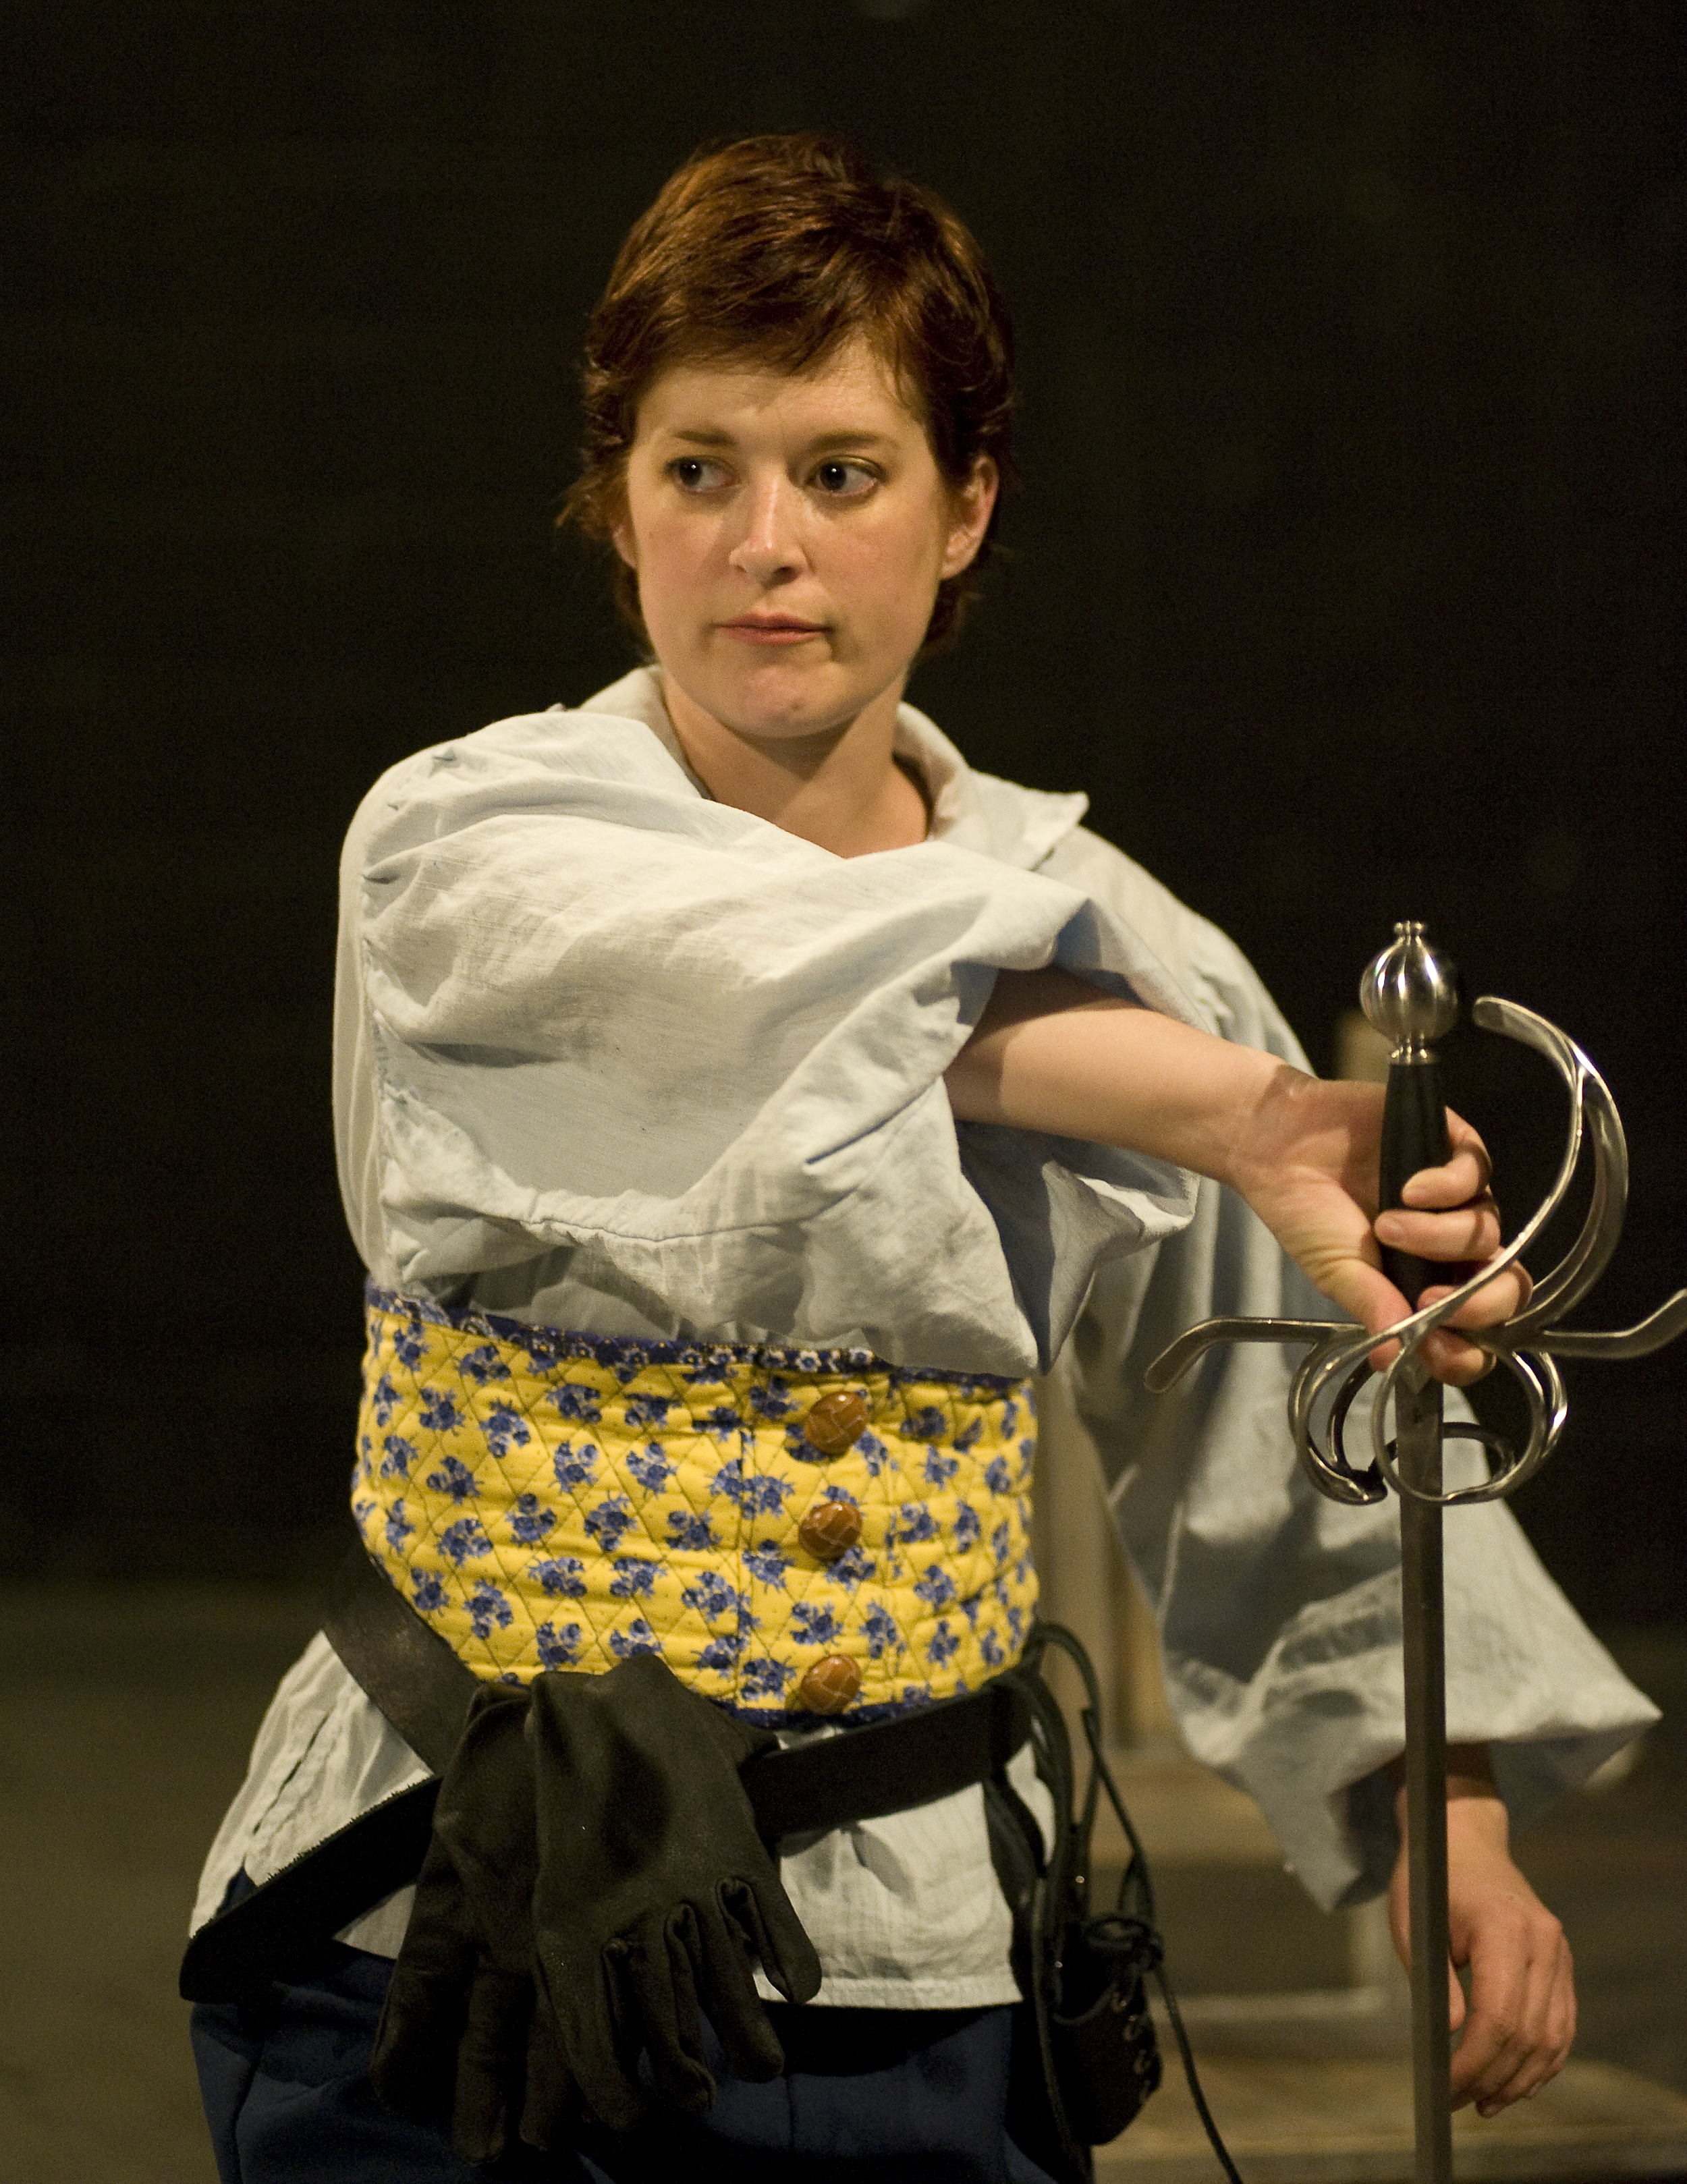 Cecile in "The Fifth Musketeer"